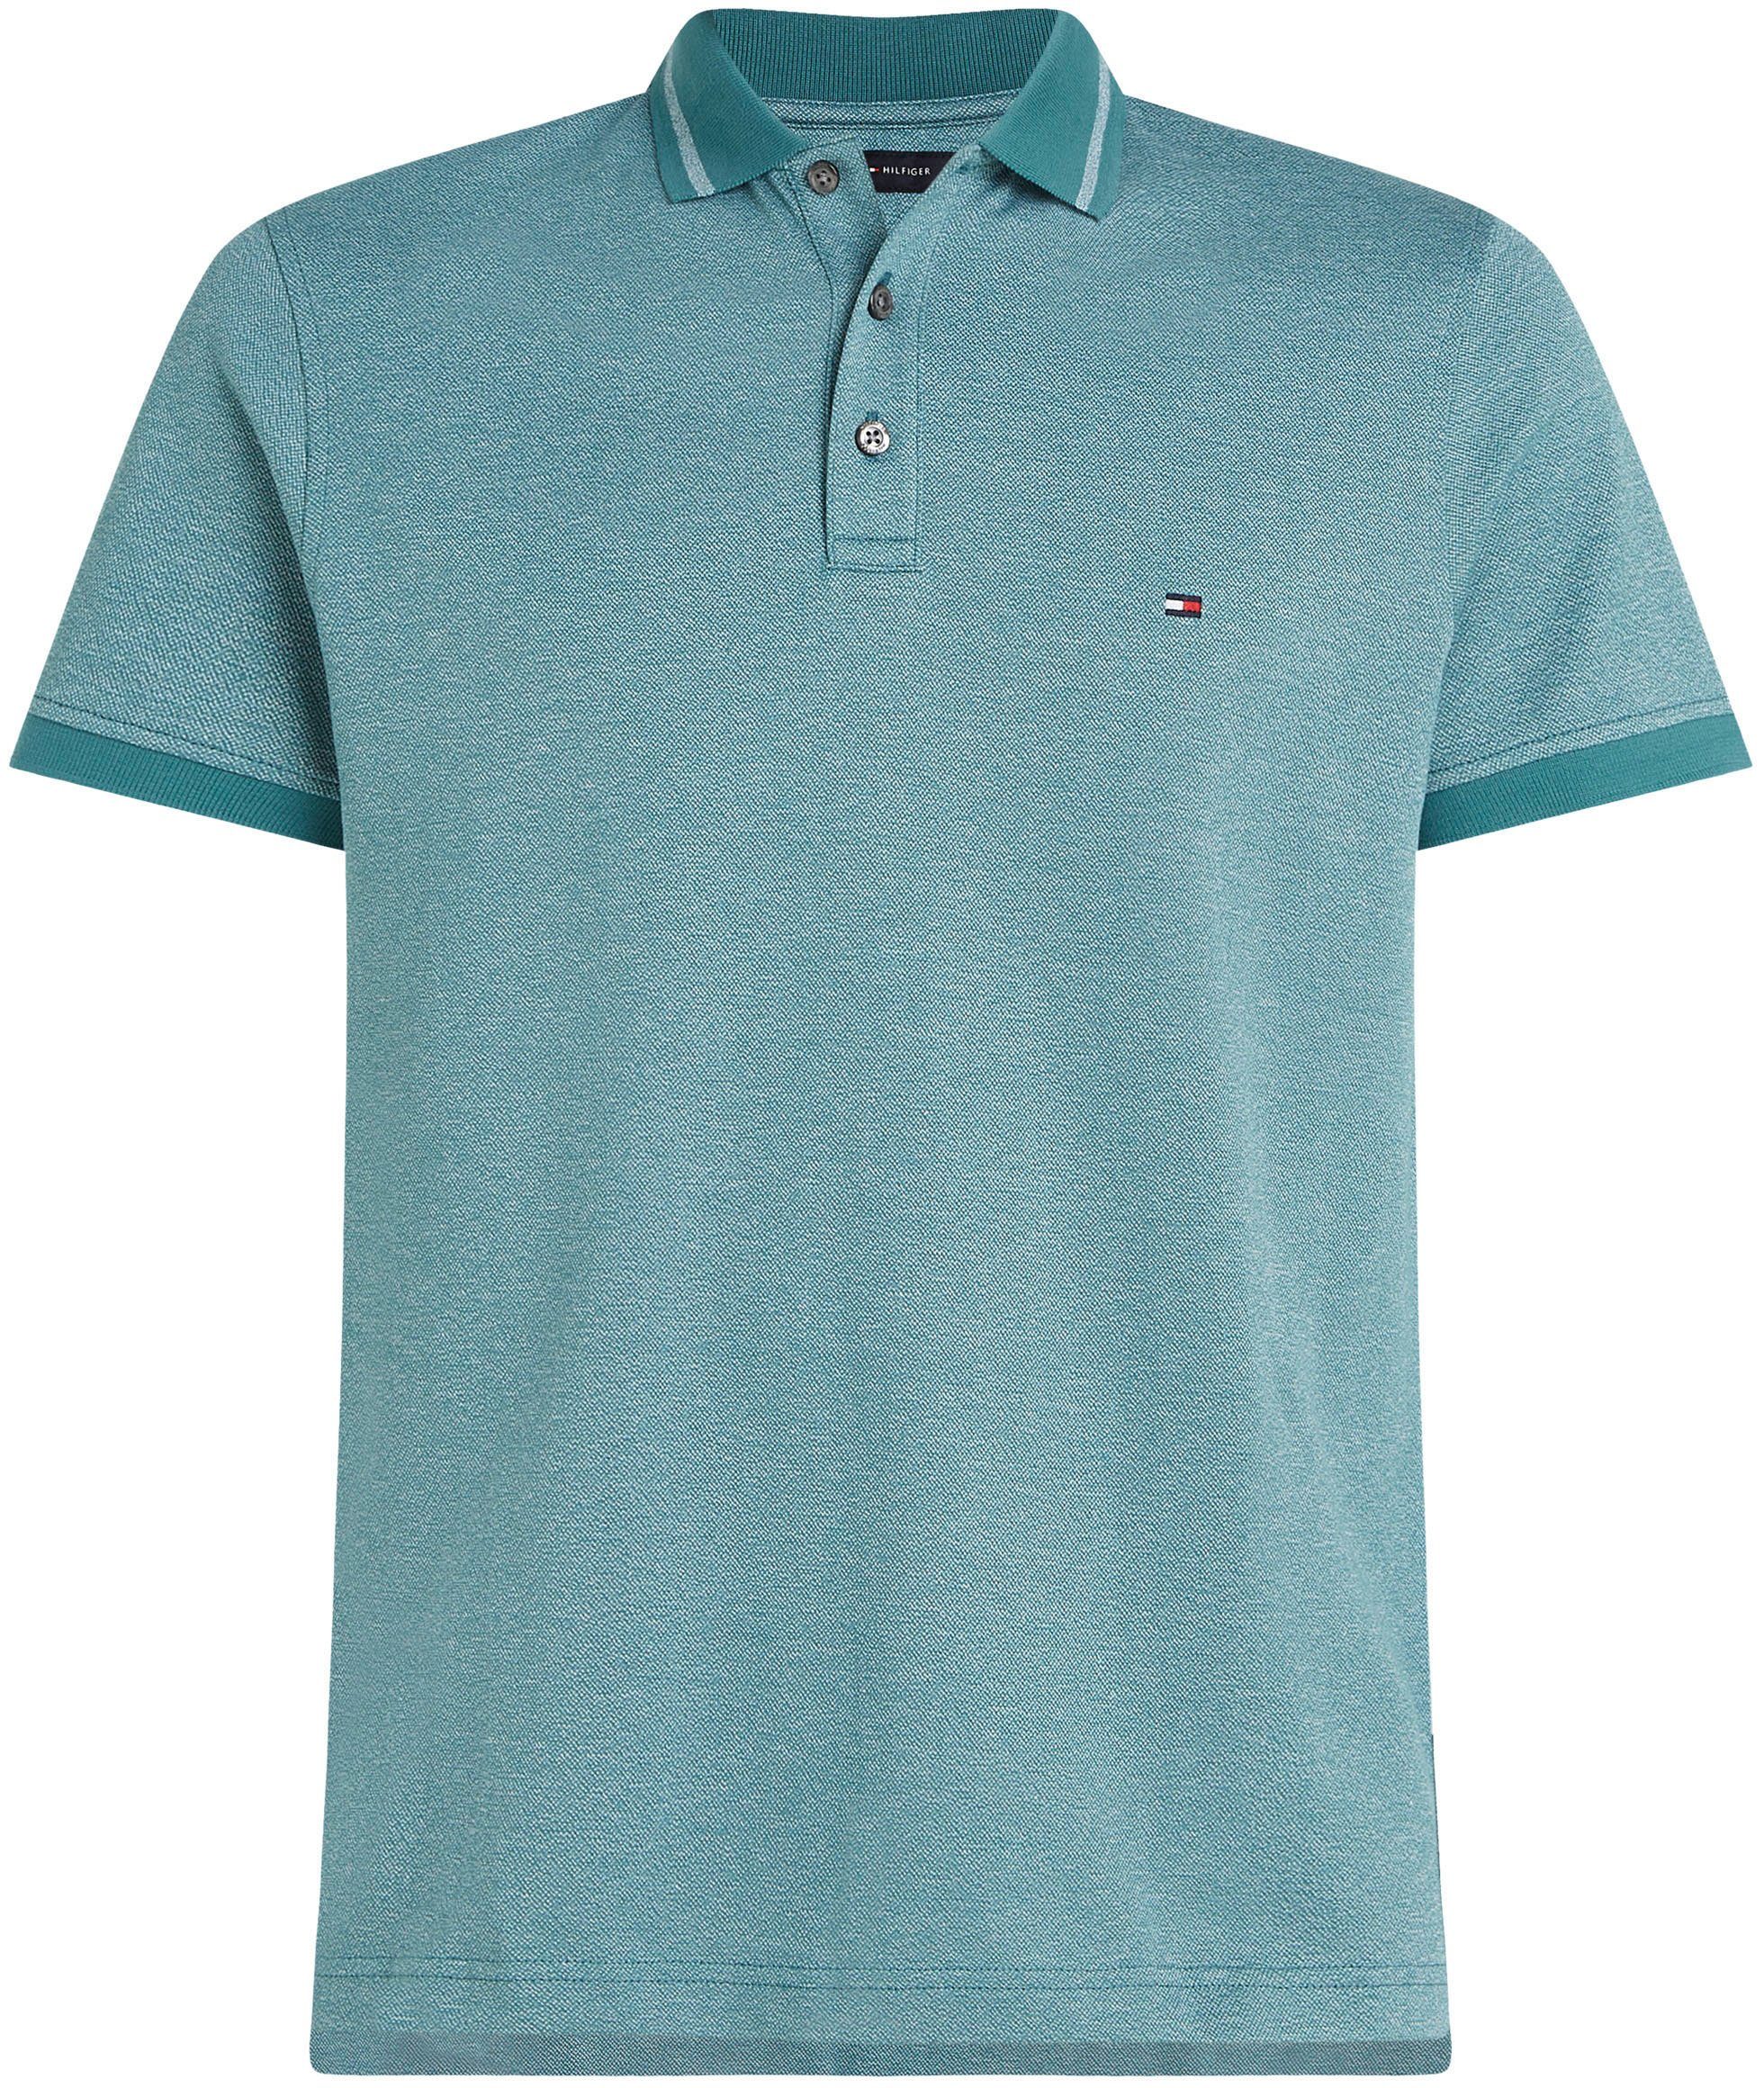 Tommy Hilfiger Poloshirt PRETWIST MOULINE Green/White Frosted Mouline-Optik TIPPED in POLO